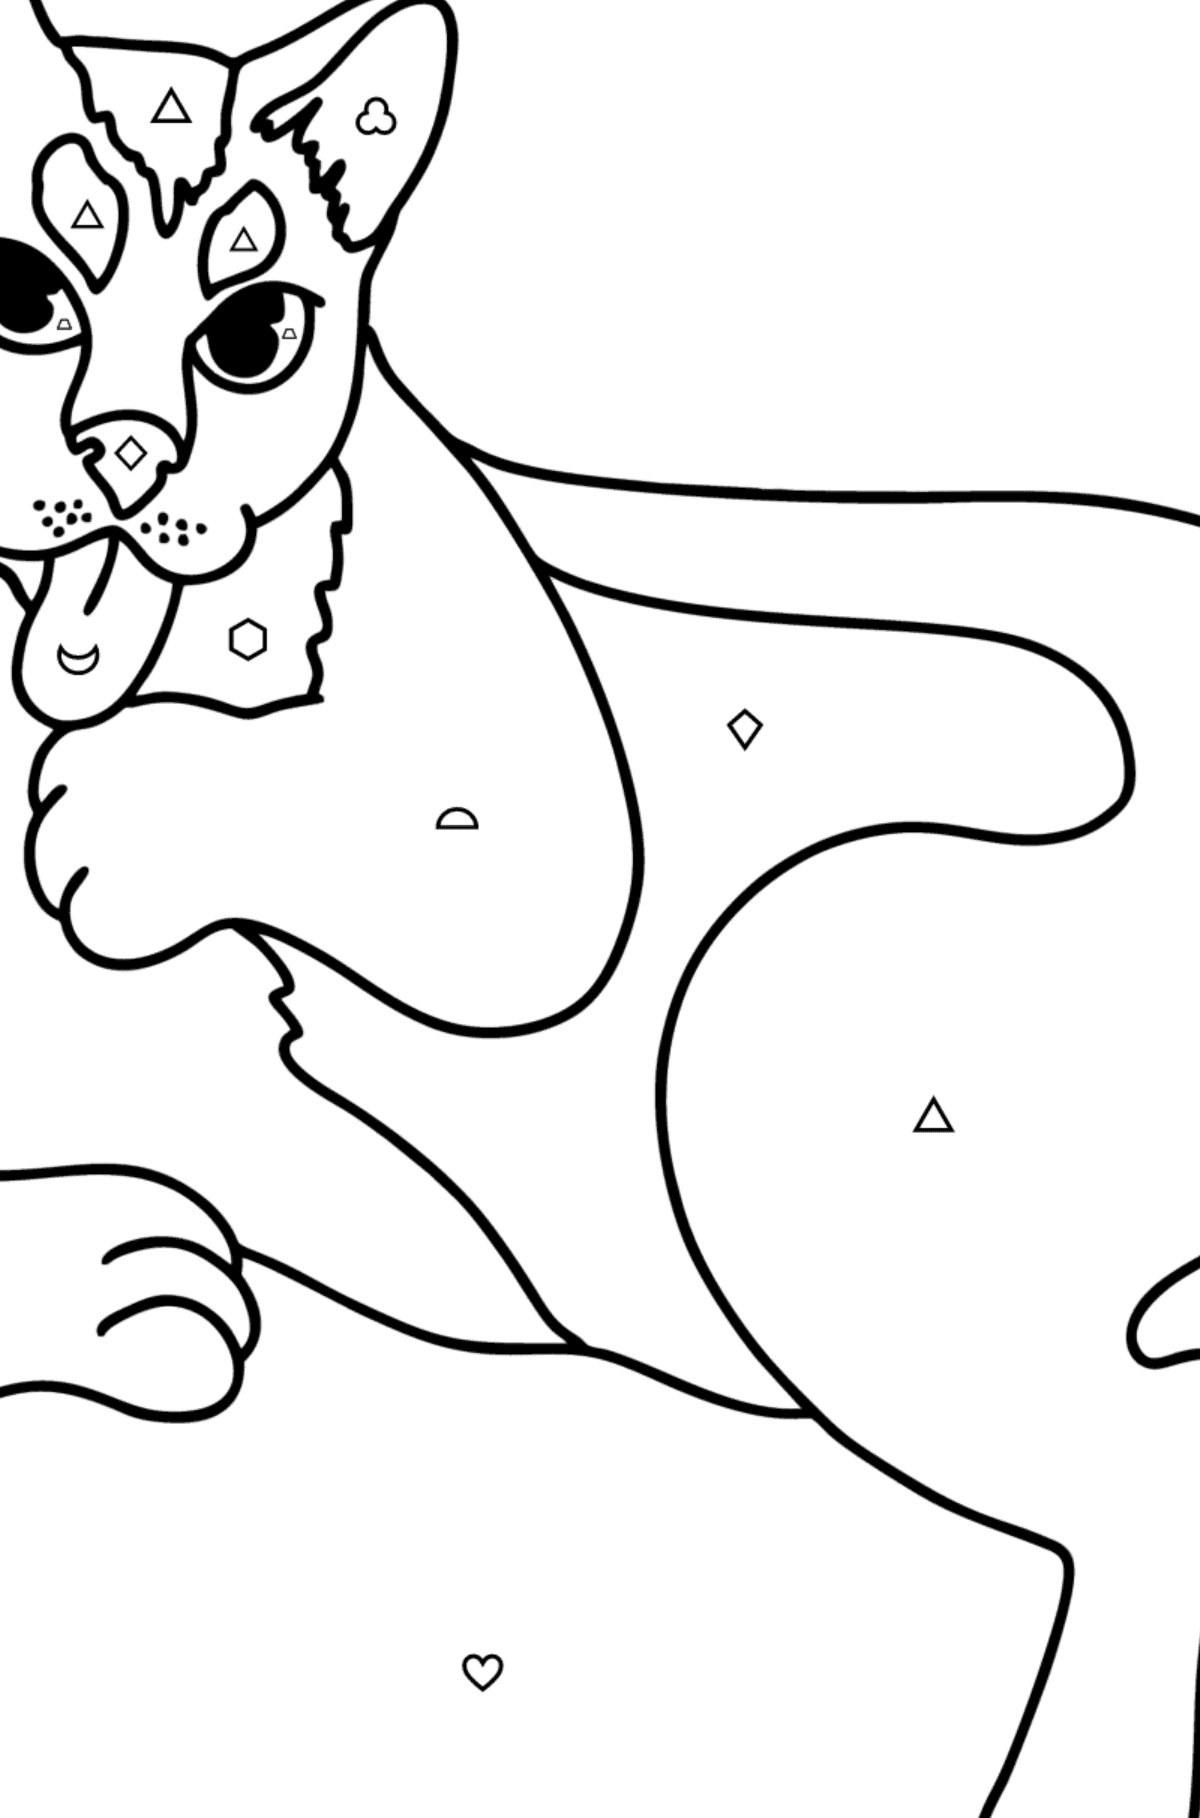 Black Cat coloring page - Coloring by Geometric Shapes for Kids